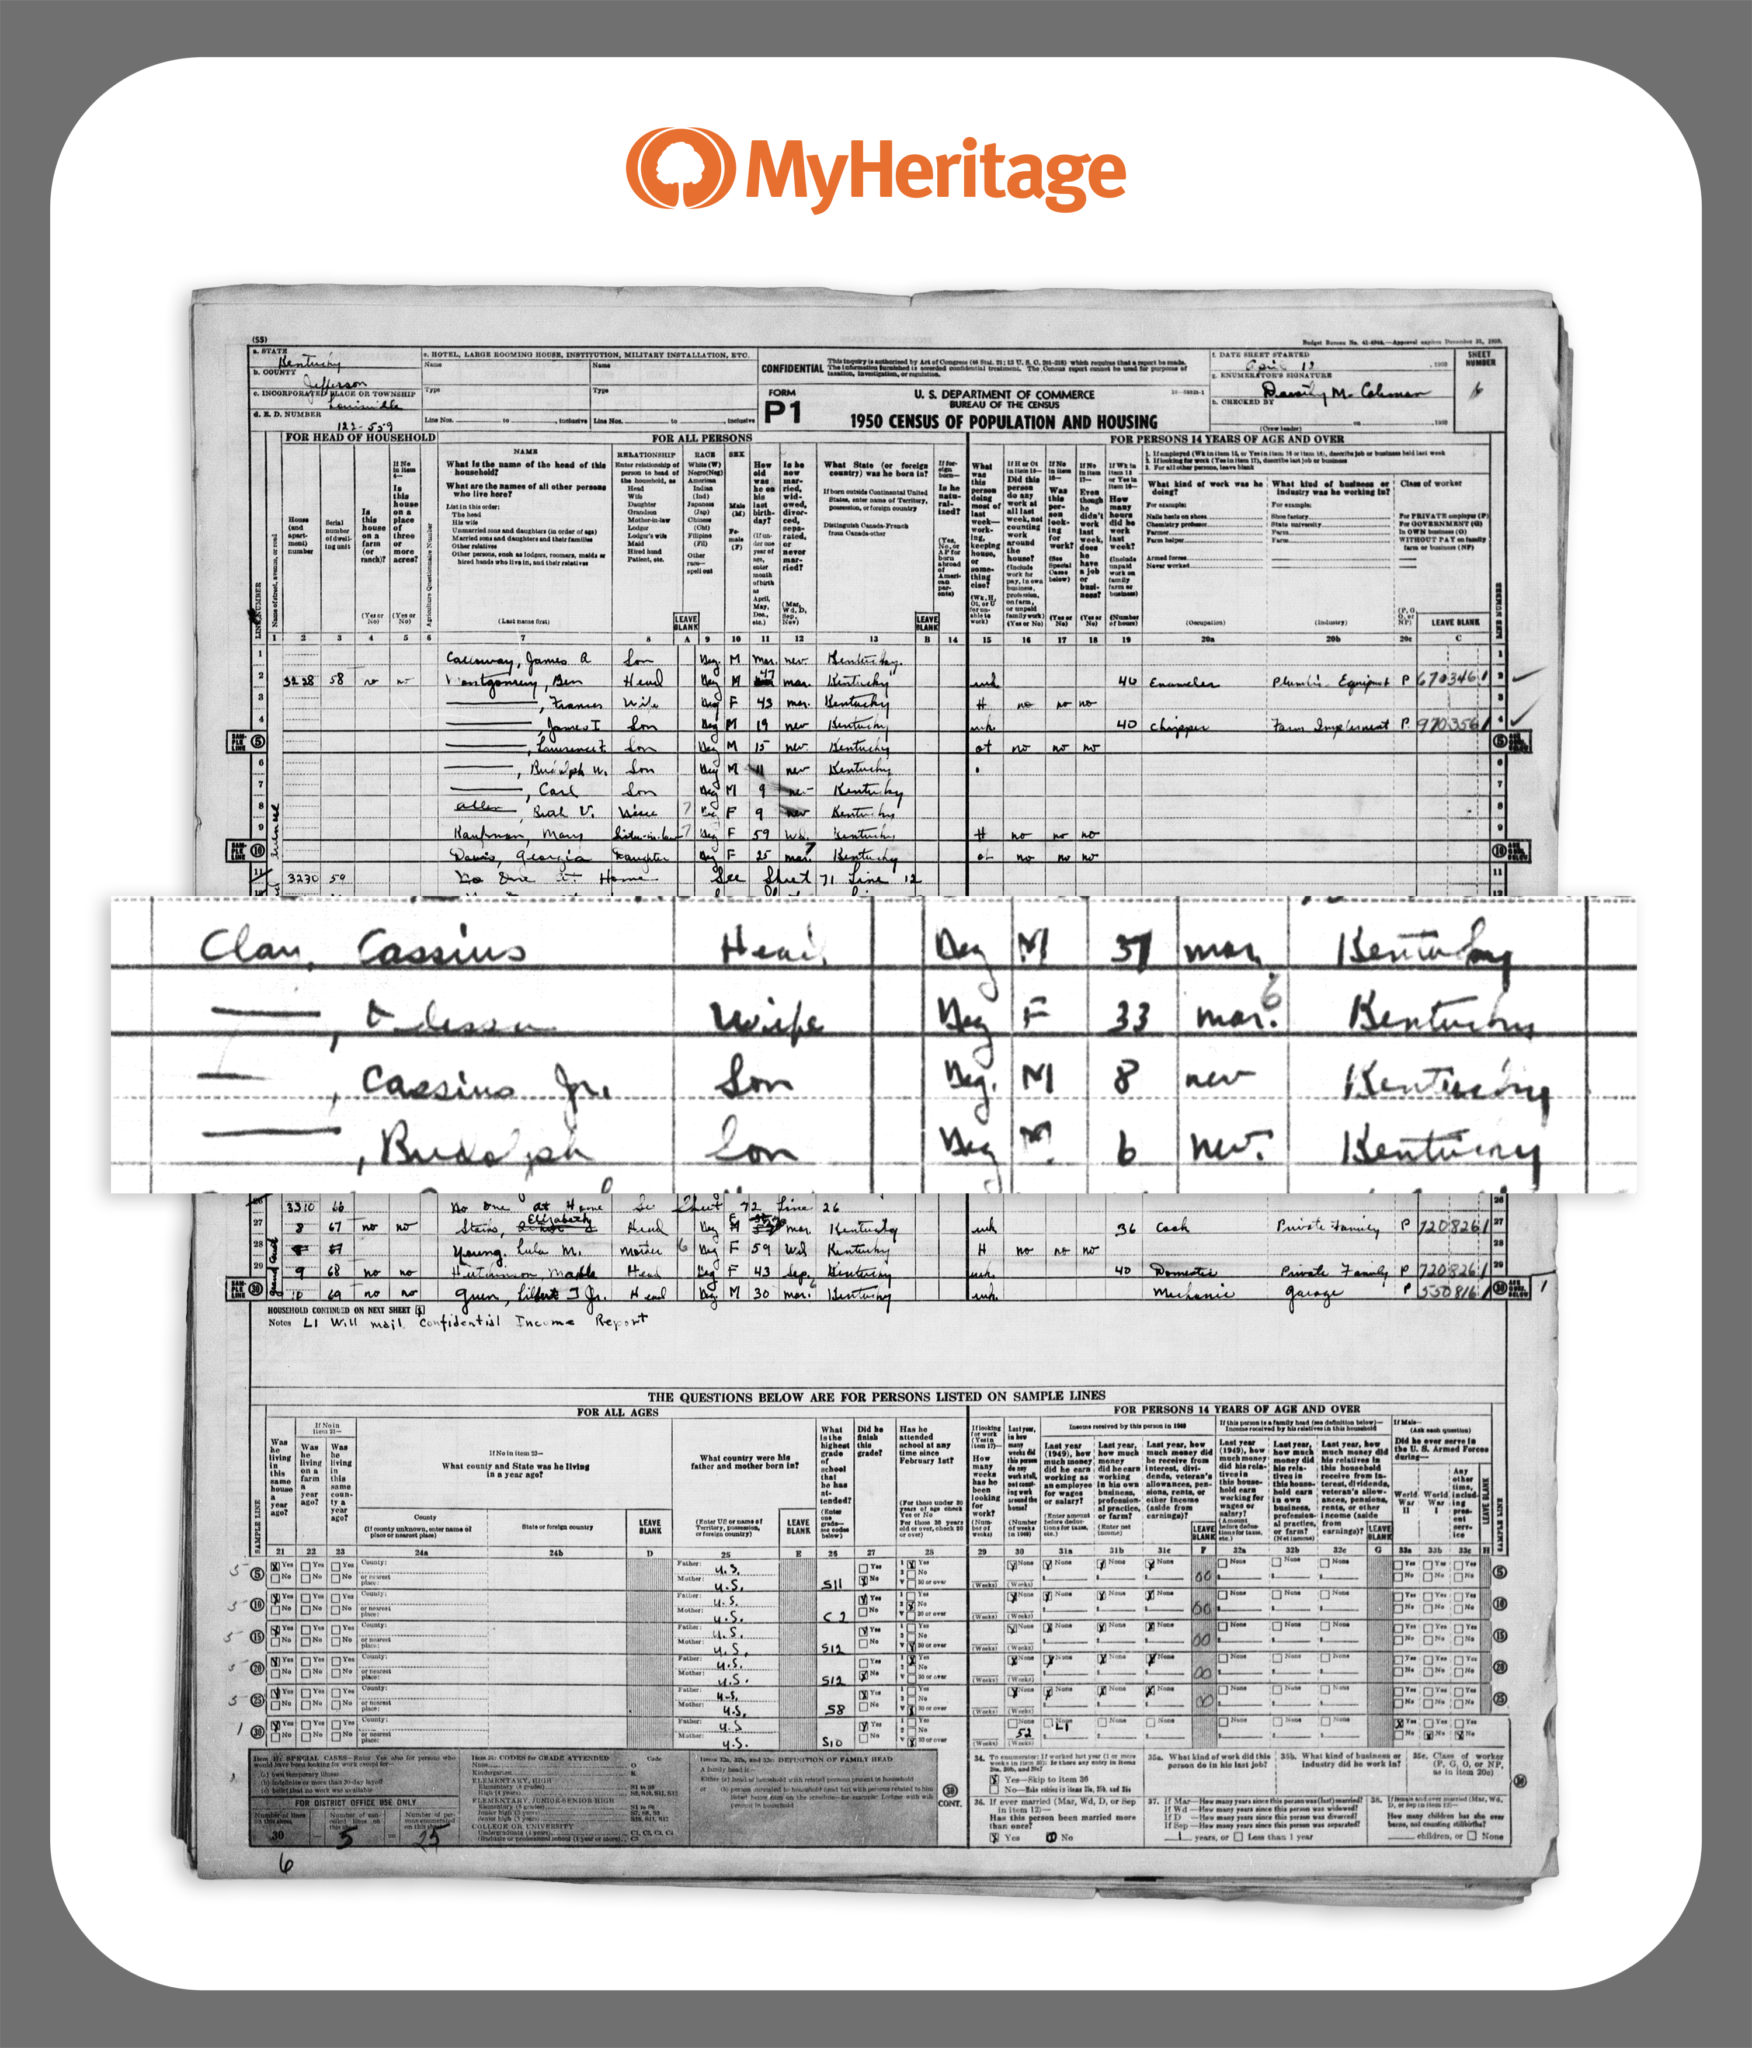 Now Live! The 1950 U.S. Census Index for Wyoming and Delaware